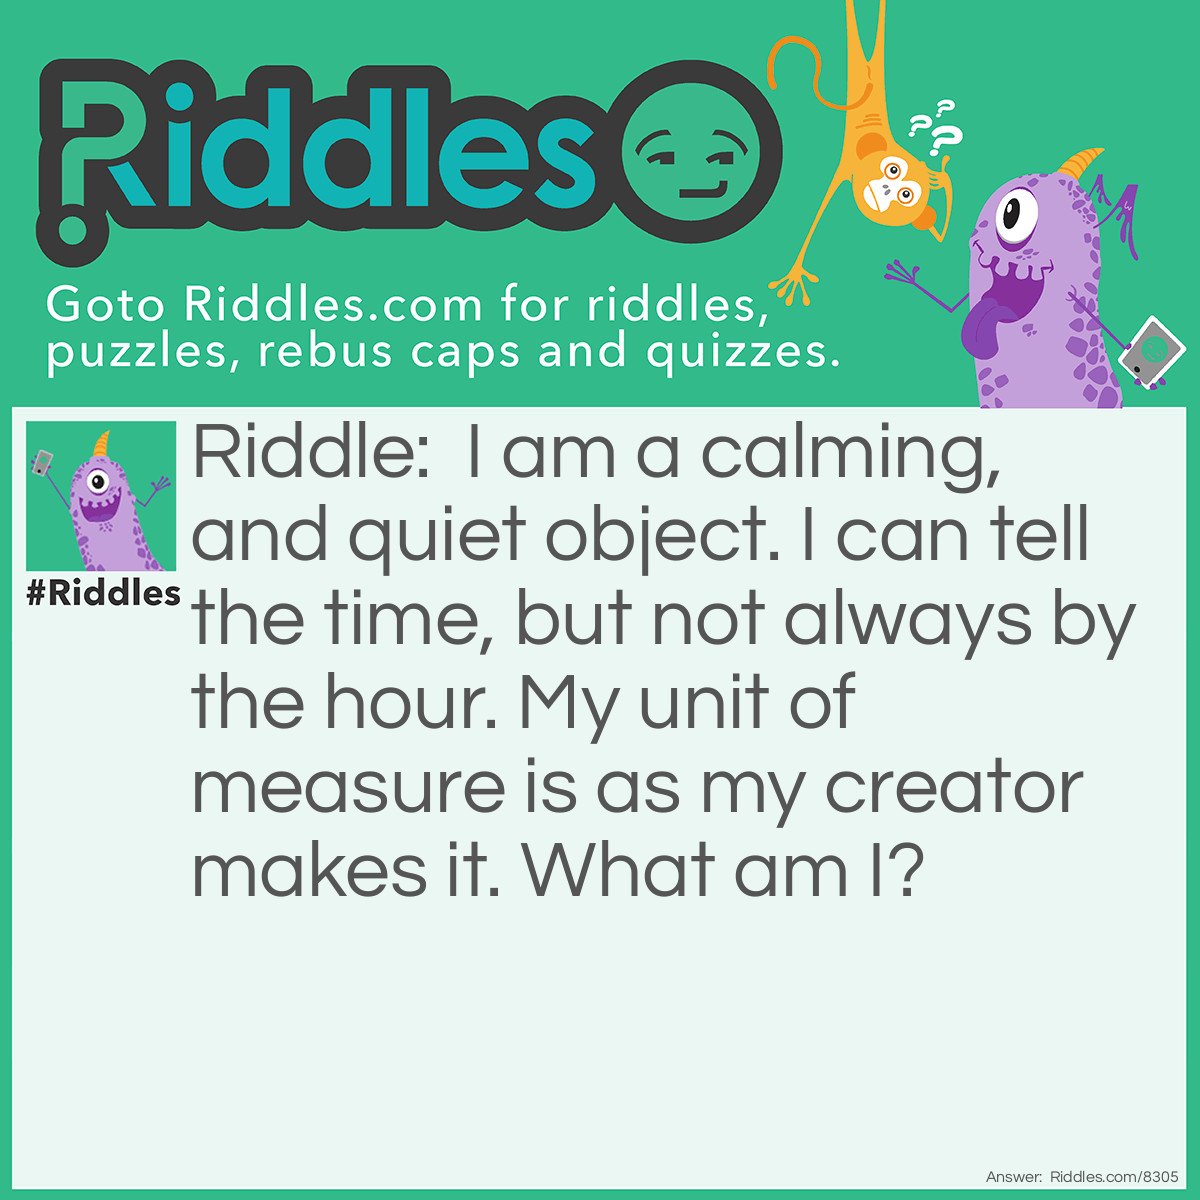 Riddle: I am a calming, and quiet object. I can tell the time, but not always by the hour. My unit of measure is as my creator makes it. What am I? Answer: Hourglass.